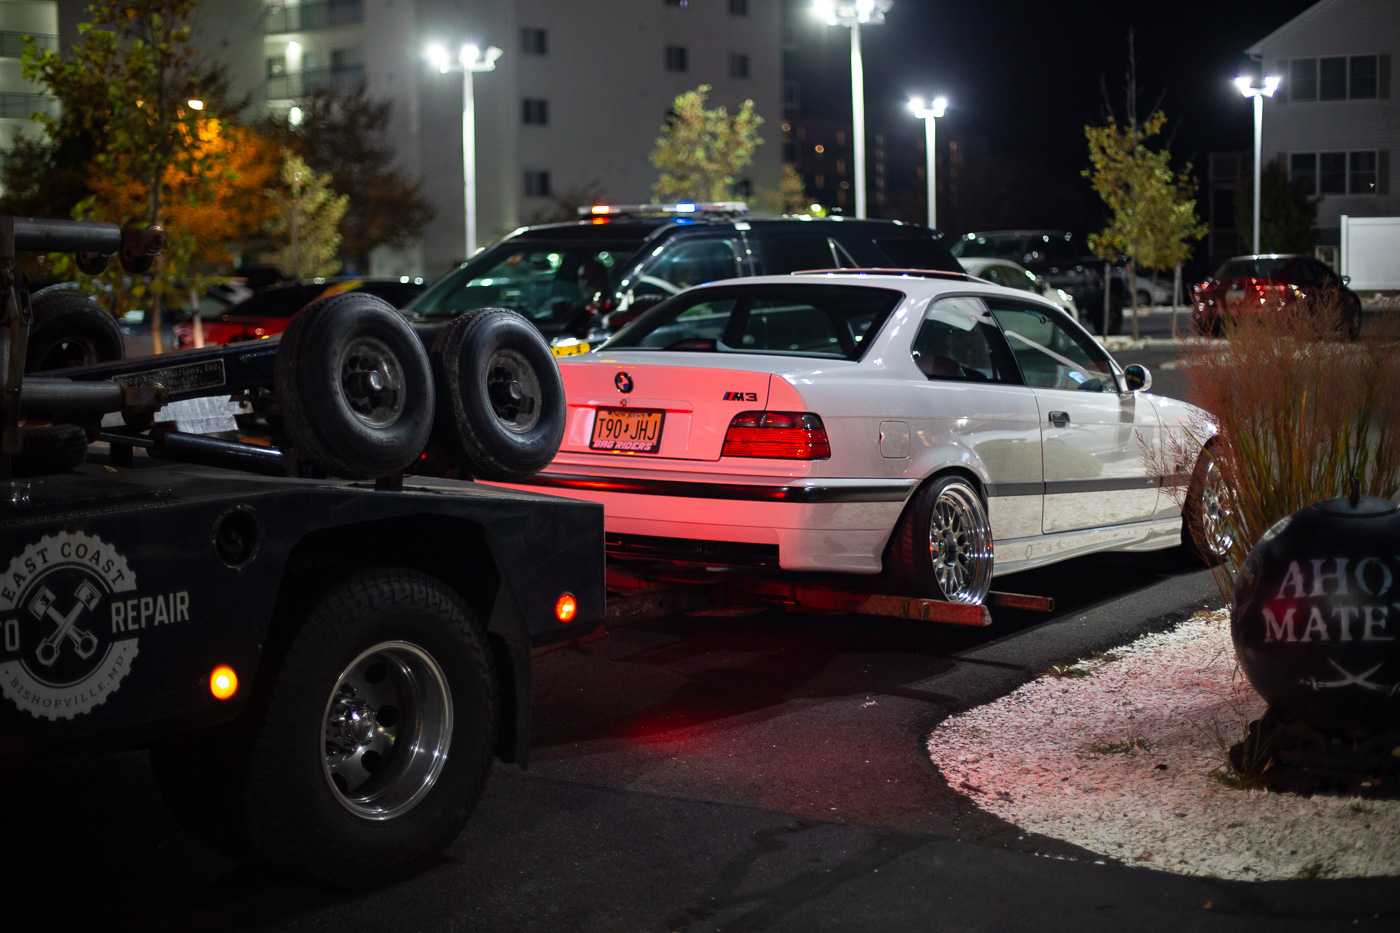 For some, getting towed at H2Oi for being too low or having excessive camber is an achievement.